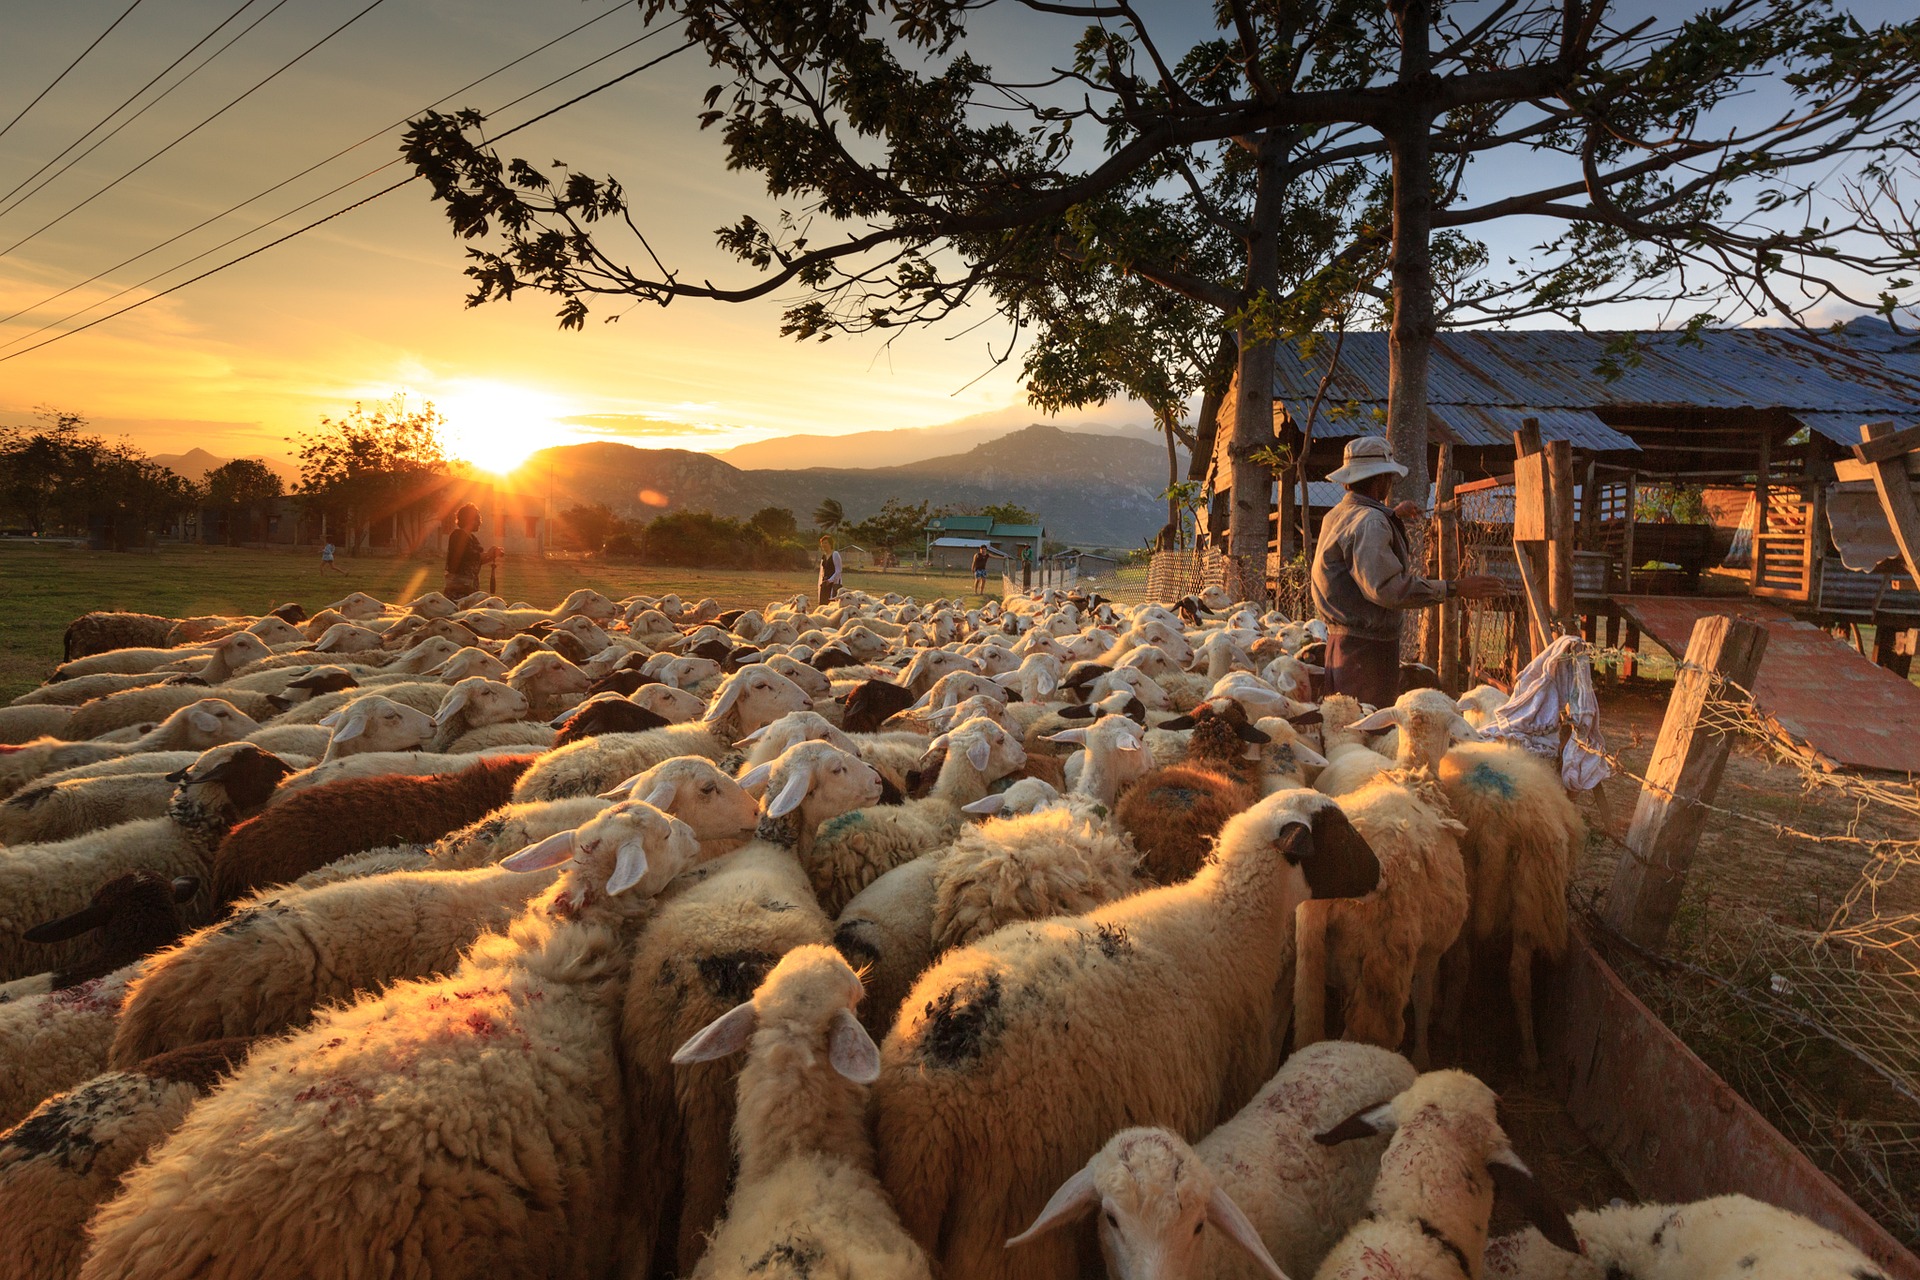 Herd of sheep on a farm at sunset